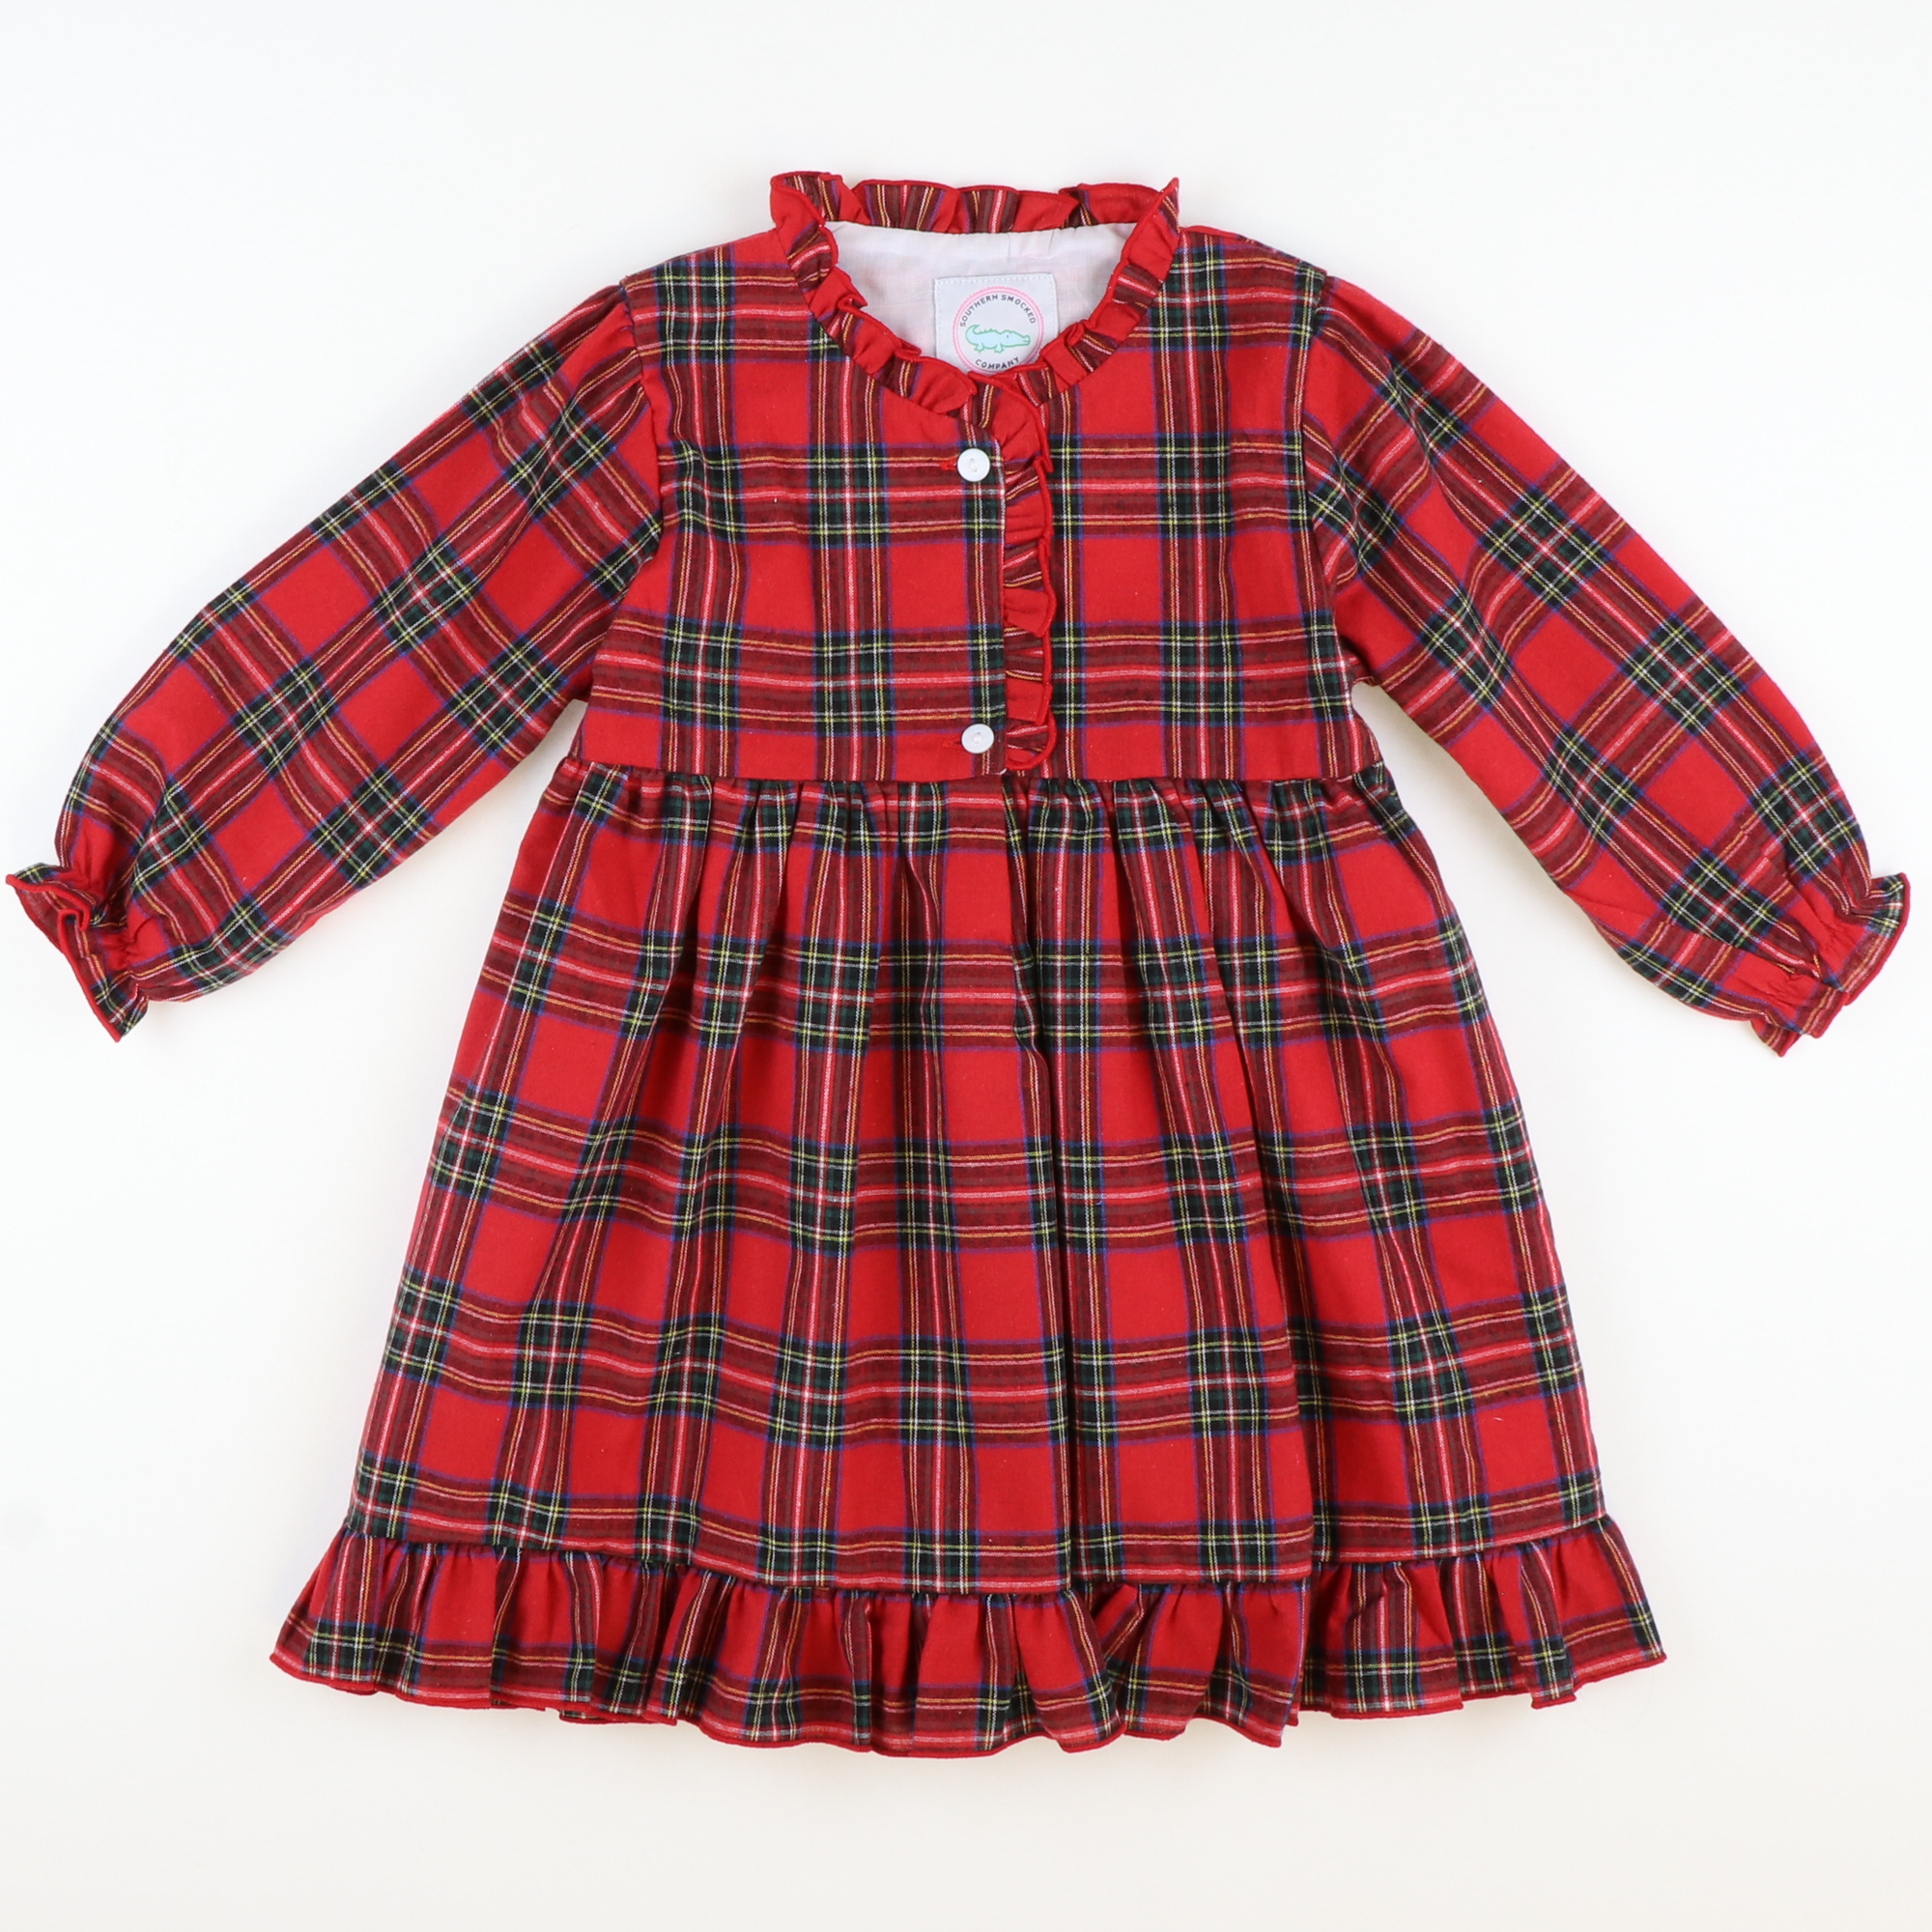 Anavini red plaid cotton gown,red plaid cotton gown,red plaid cotton  nightgown,baby girls red plaid smocked daygown,toddler girls red plaid  smocked daygown,little girls red plaid smocked daygown,red smocked nightgown  for baby girls,red smocked